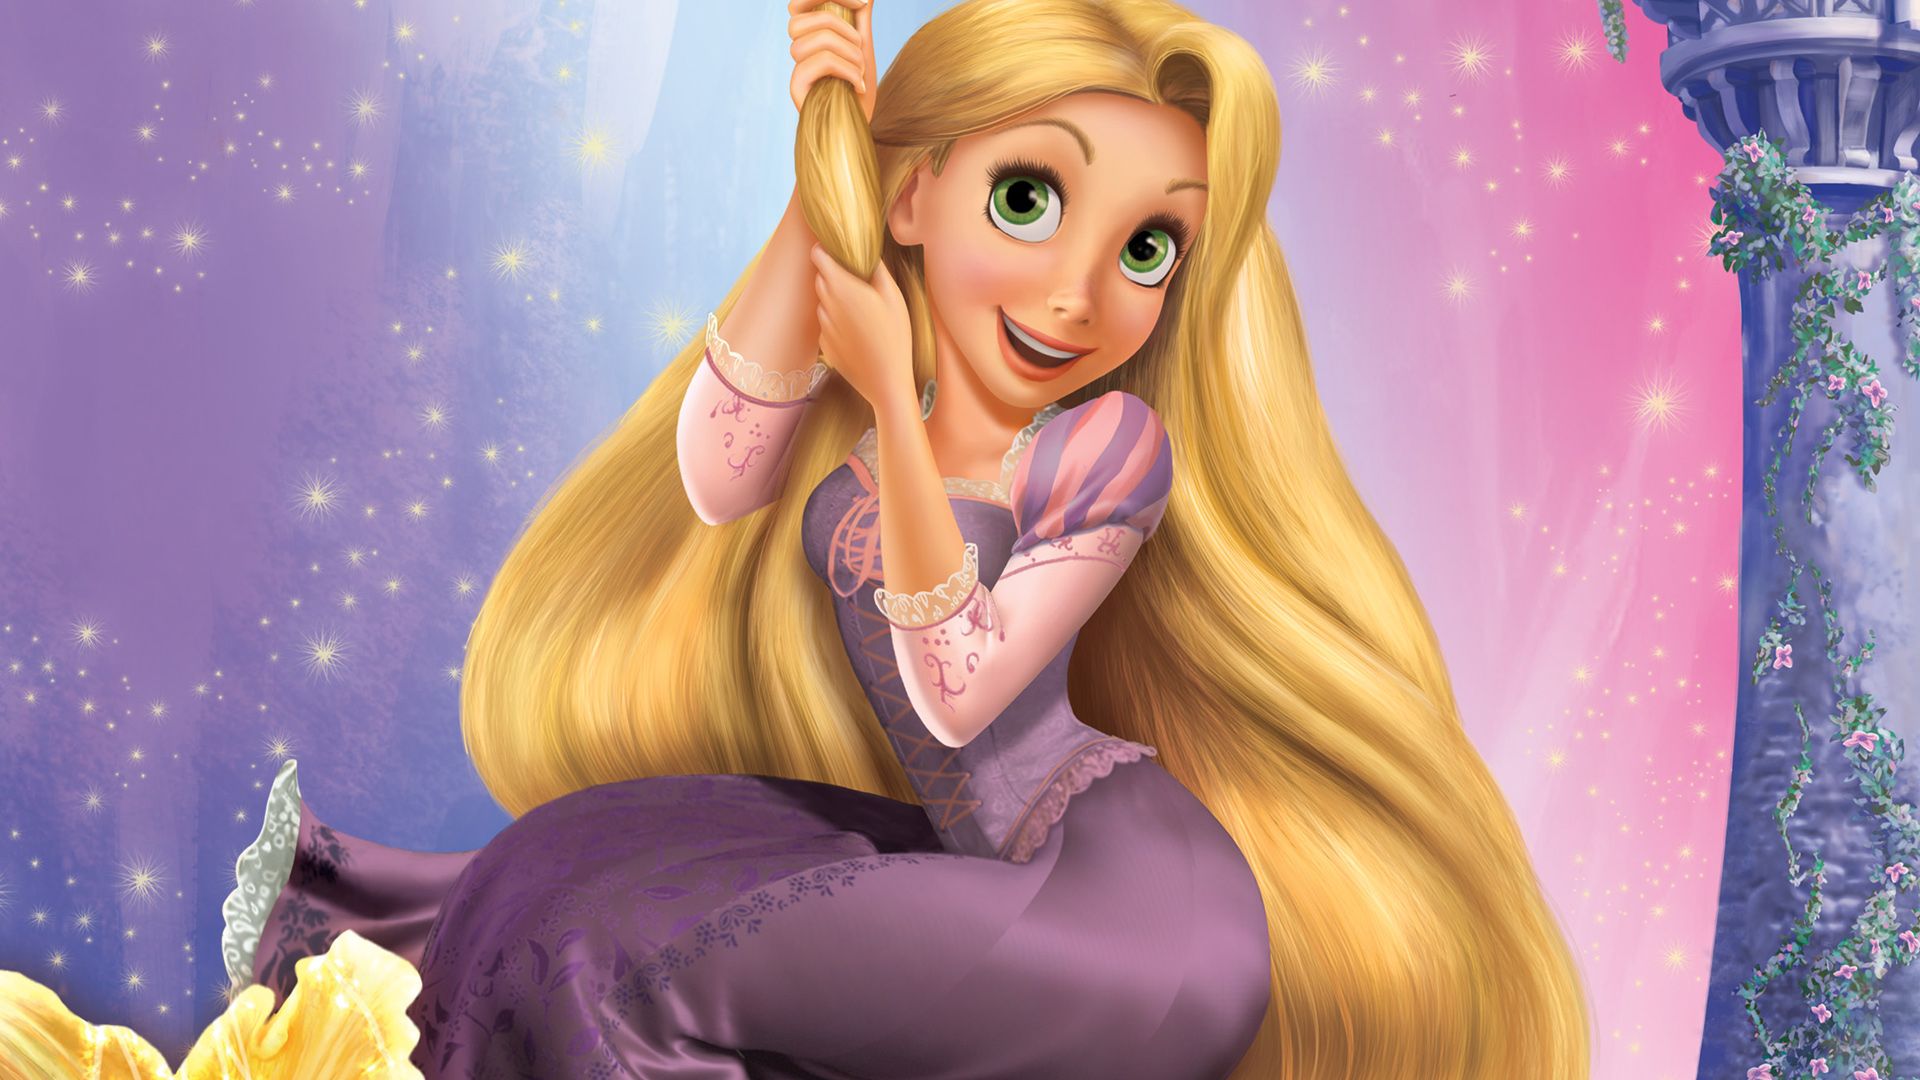 TANGLED y wallpaper | 1920x1080 | 102605 | WallpaperUP